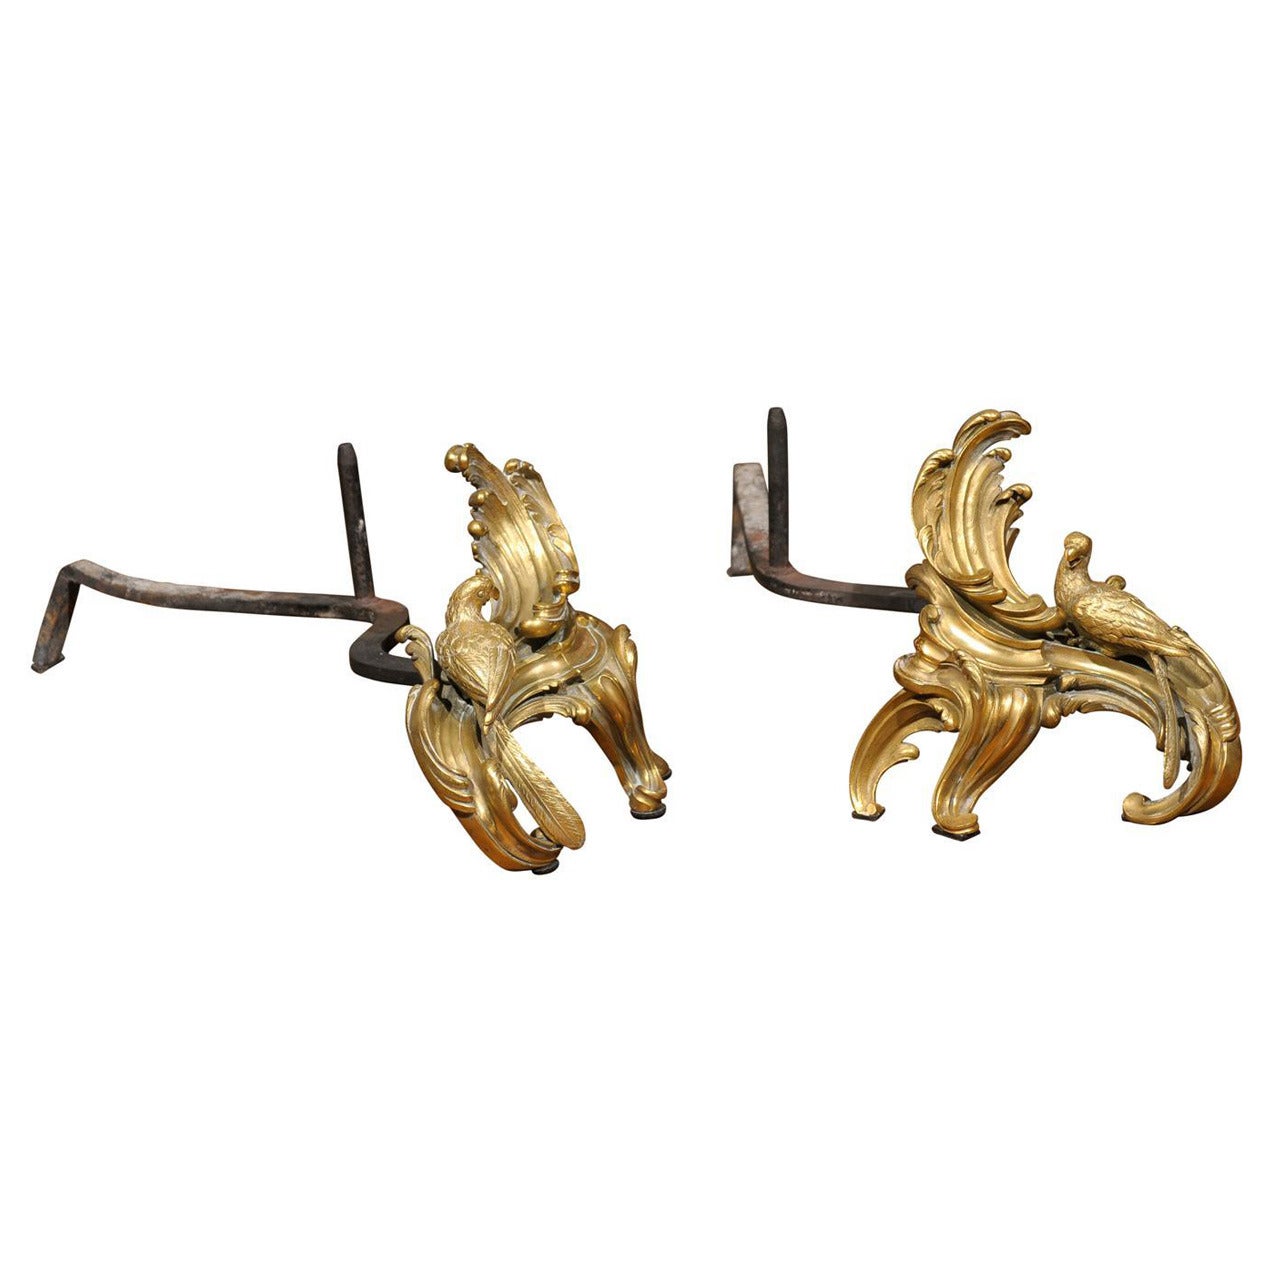 Pair of Rococo Style Gilt Bronze & Wrought Iron Andirons For Sale